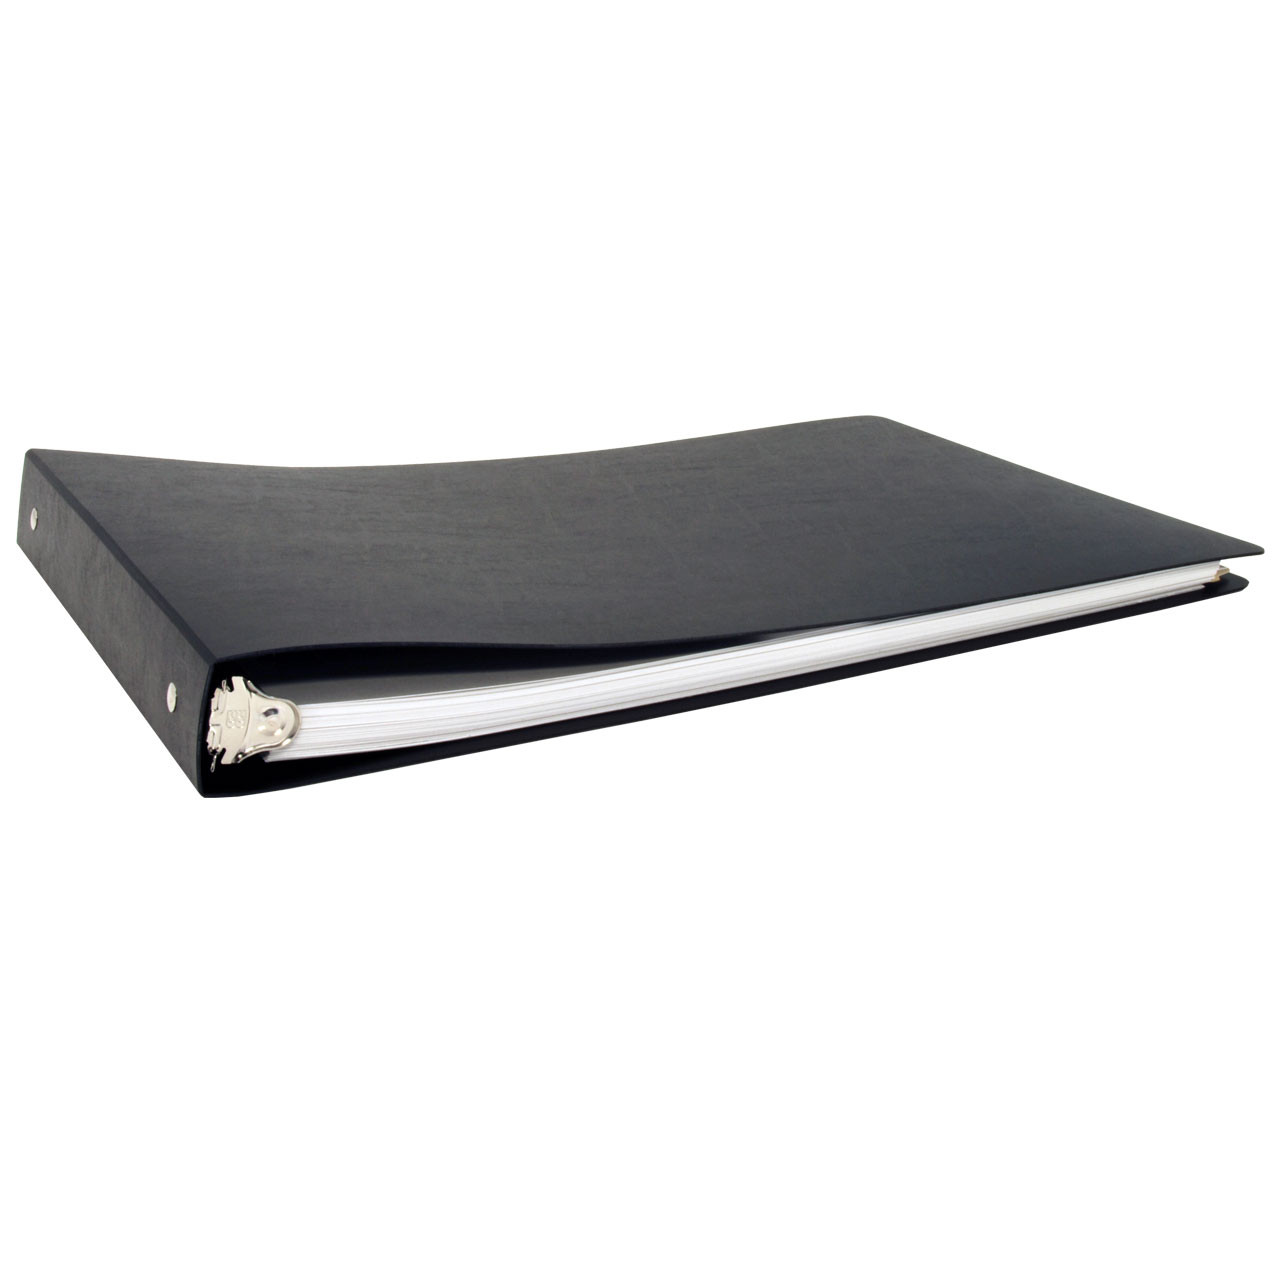 11x17 Poly Binder Angle-d Ring 17 X 11 Inches Black 617610 for